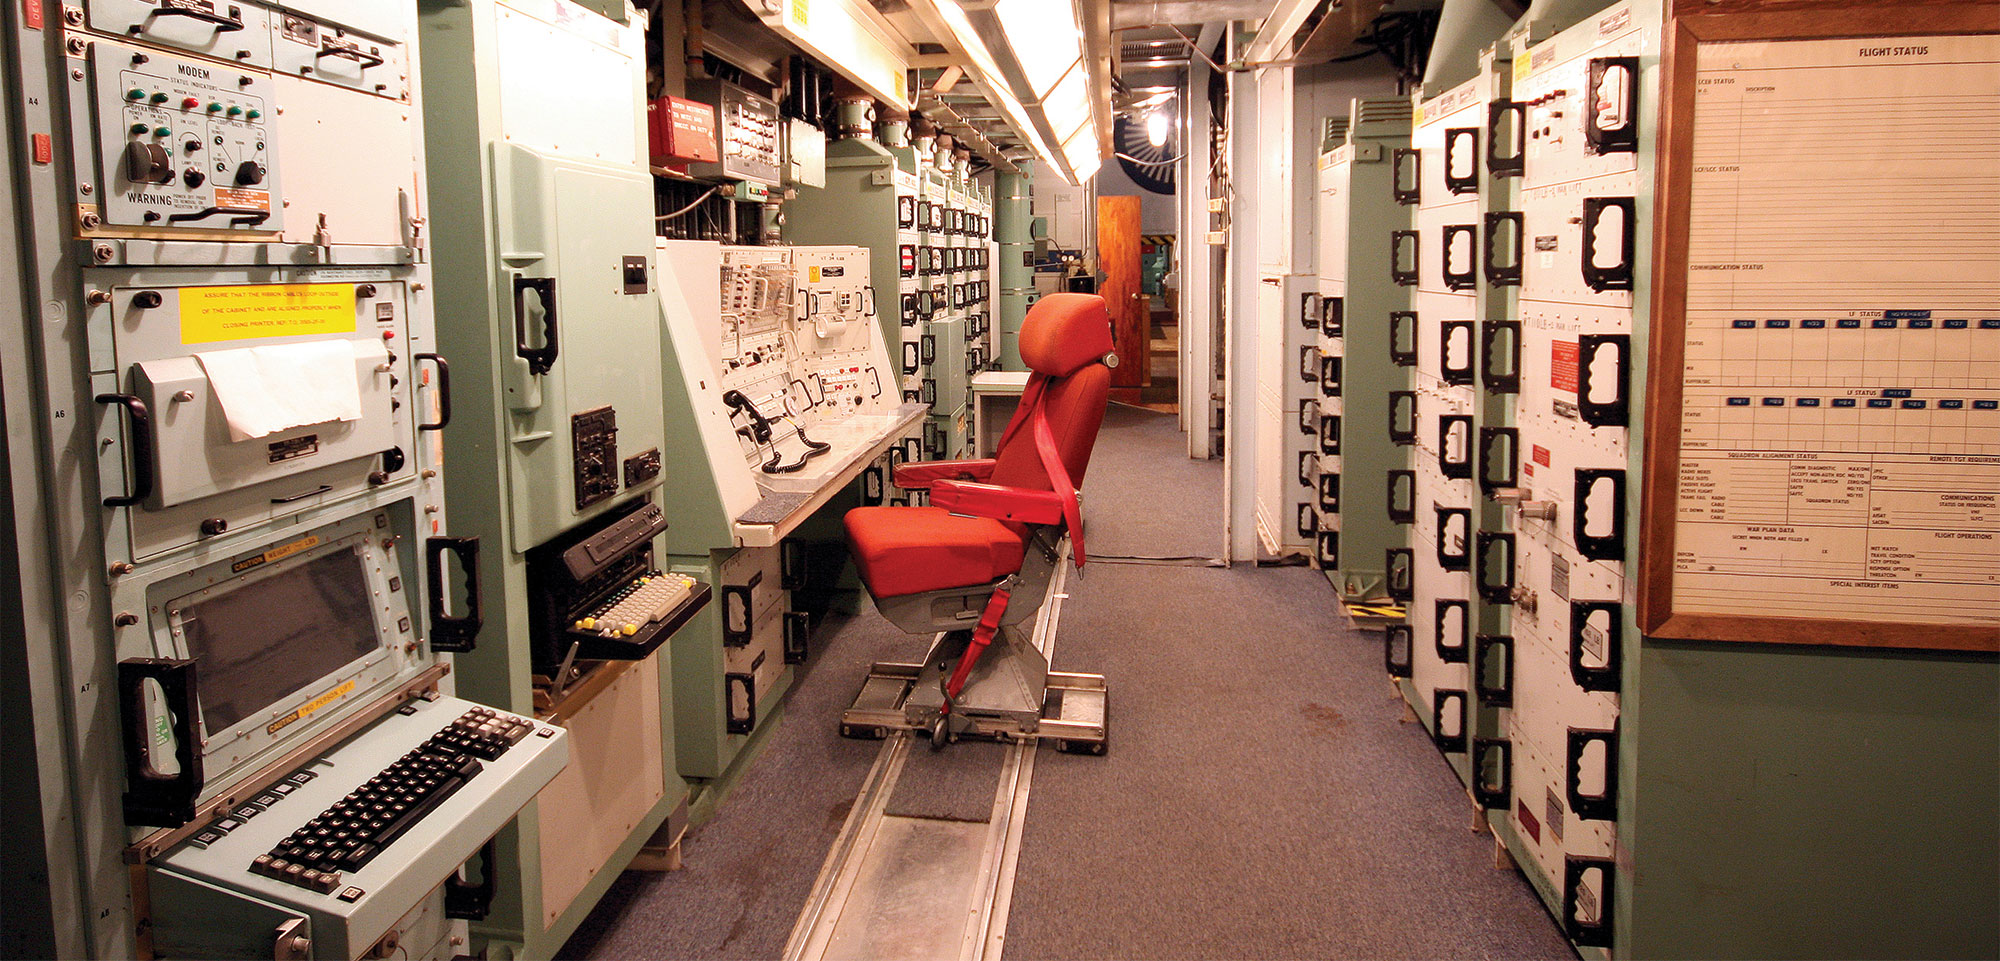 A red chair is shown sitting in the middle of walls of control panels